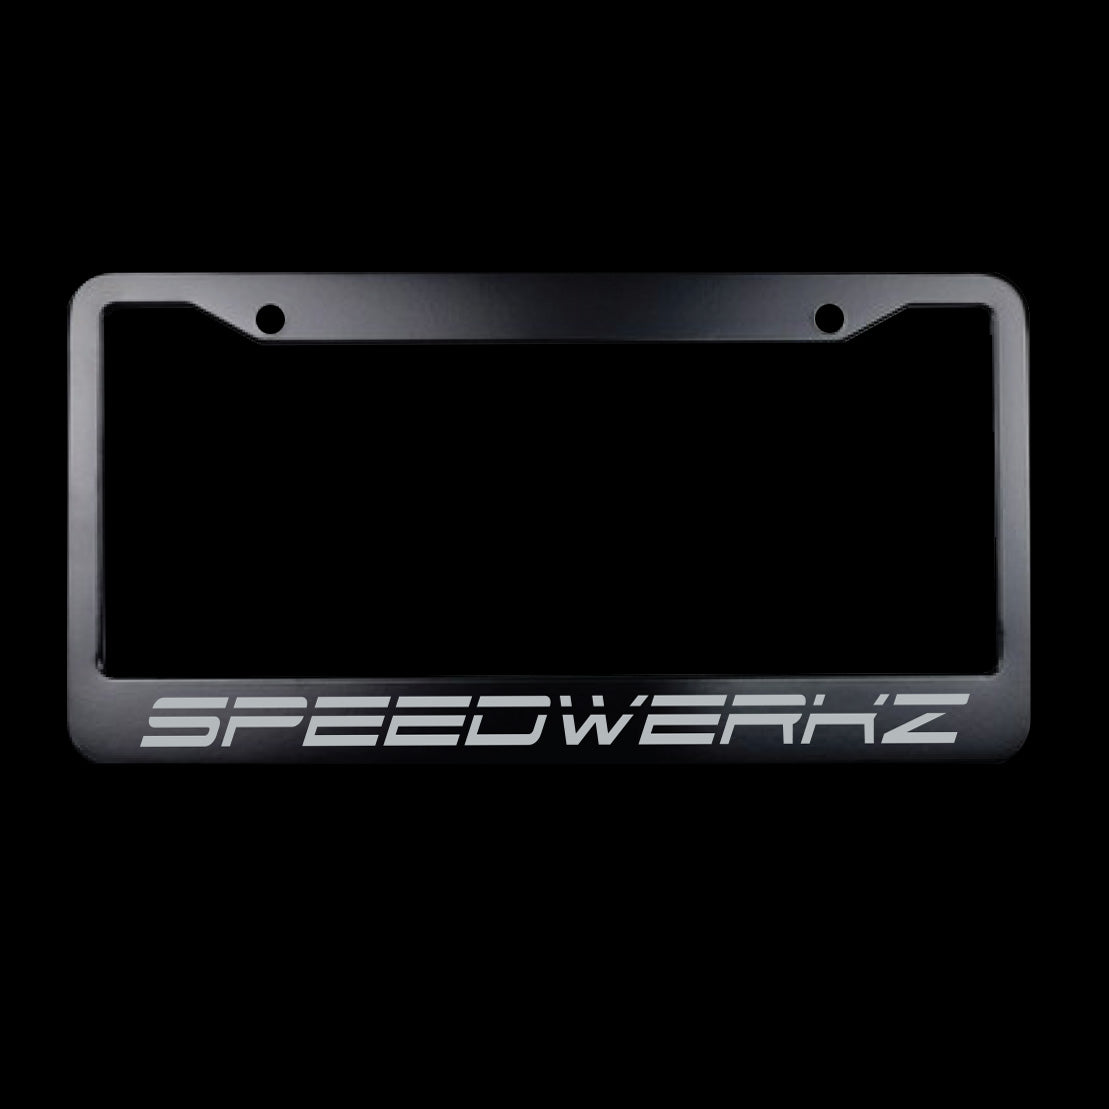 Speedwerkz license plate cover for a car 